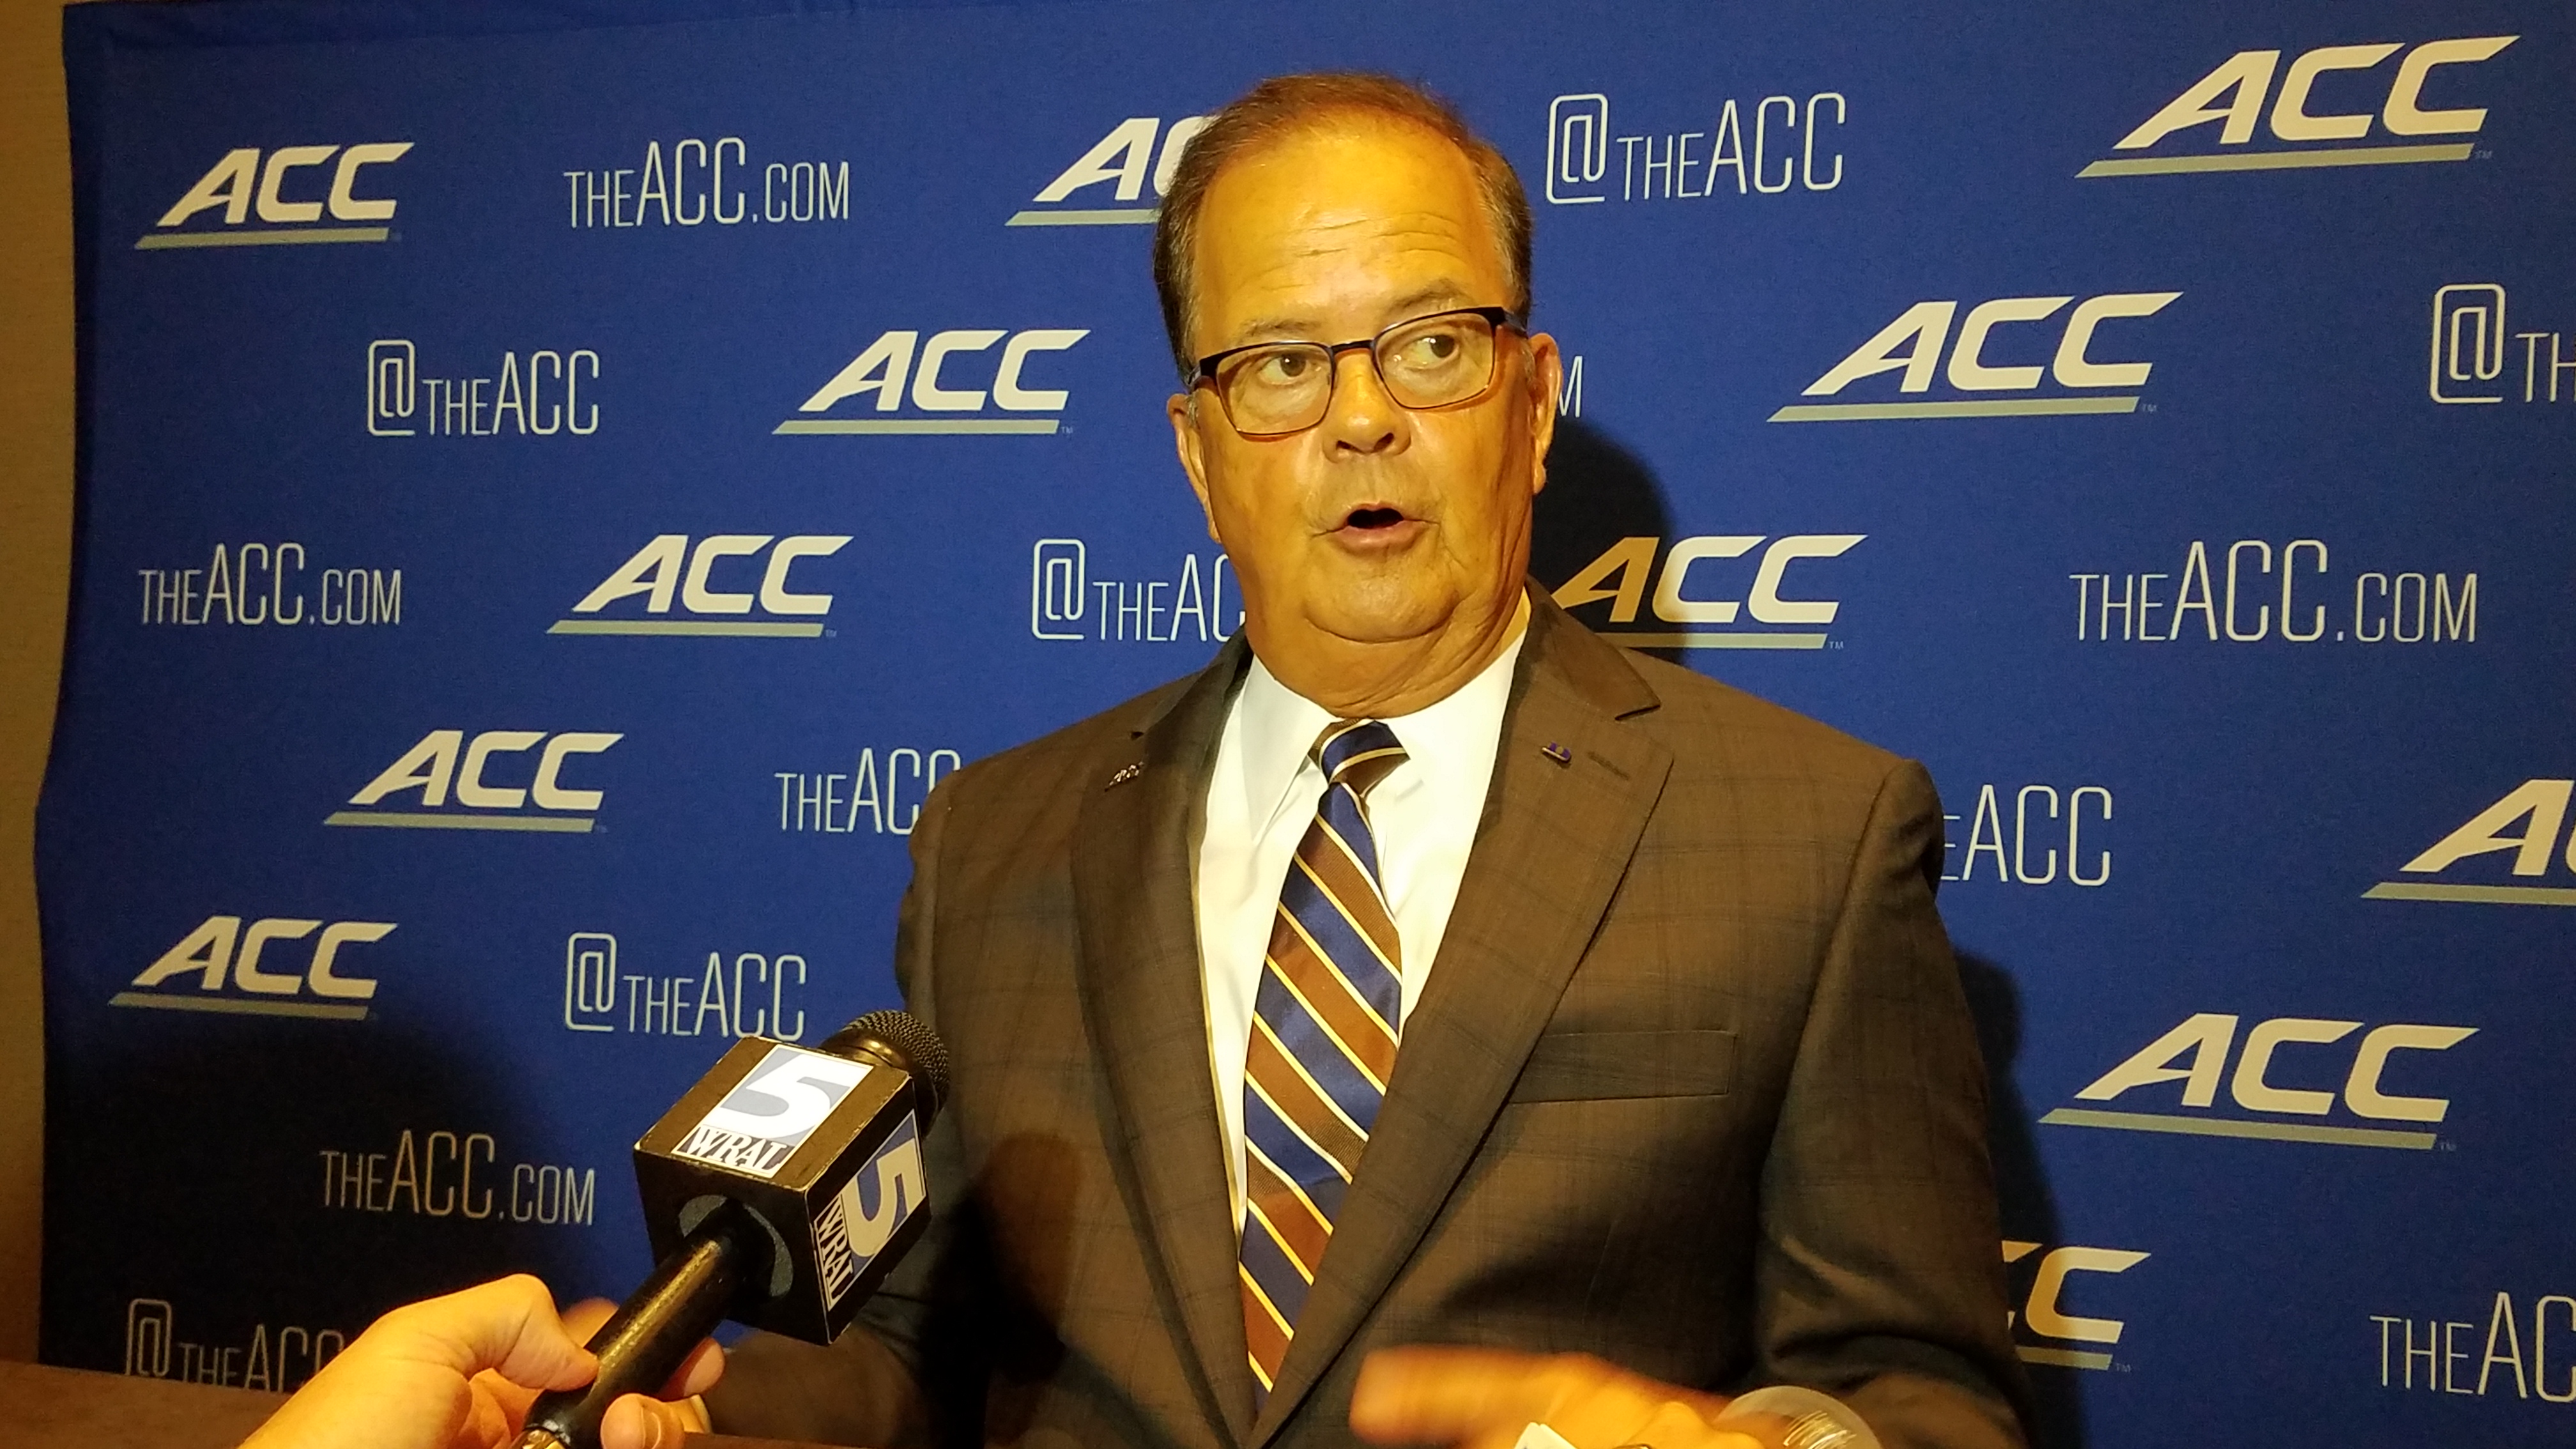 Duke, with more experience and offensive targets, expects to be much better than a year ago